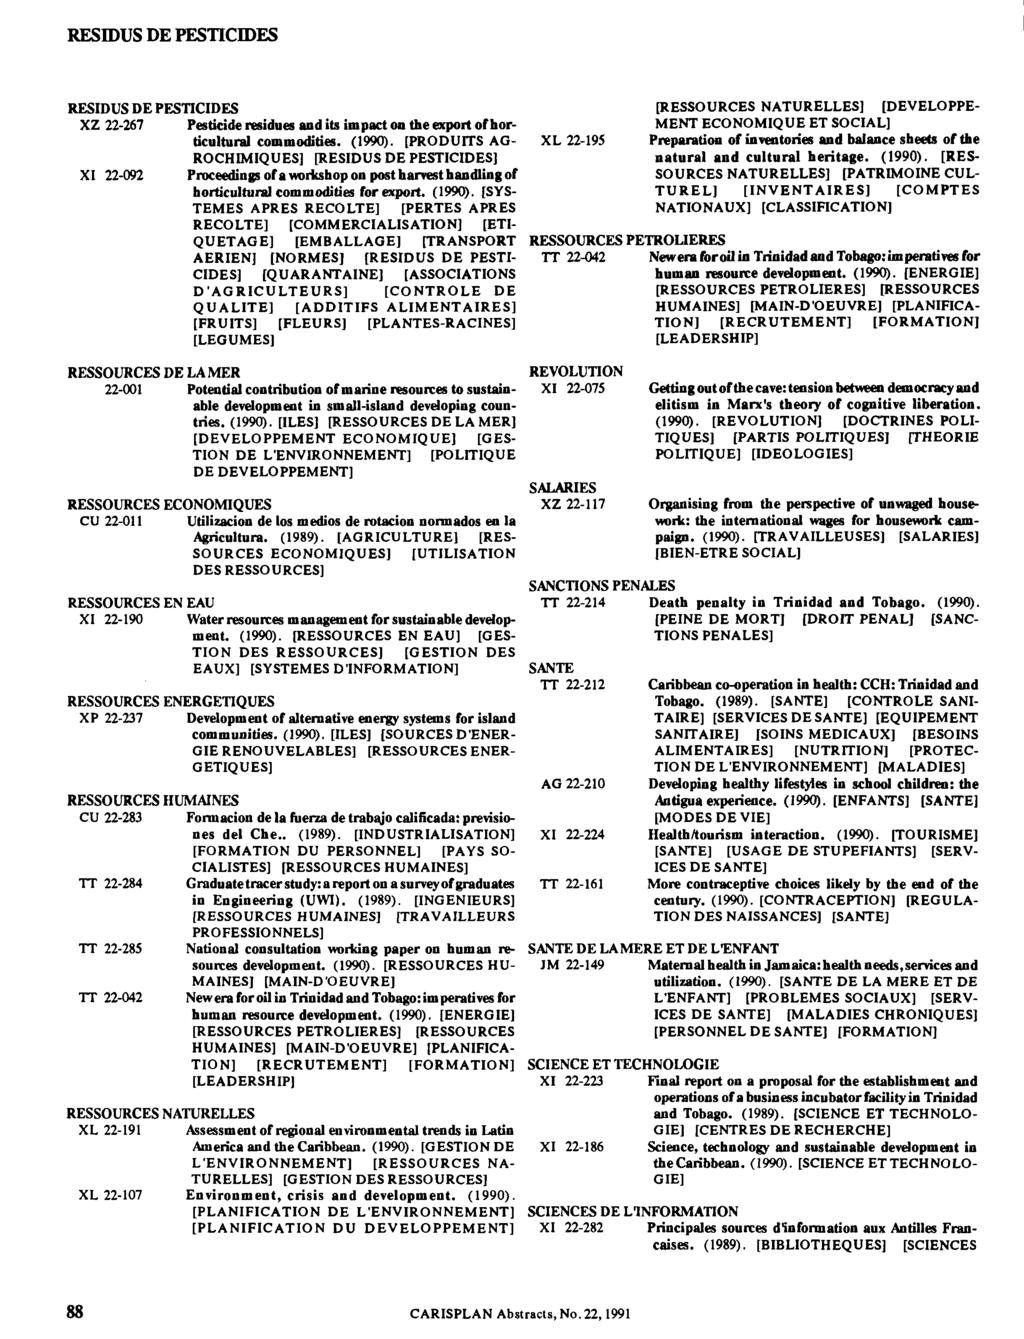 RESIDUS DE PESTICIDES RESIDUS DE PESTICIDES XZ 22-267 Pesticide residues and its impact on the export of horticultural commodities. (1990).